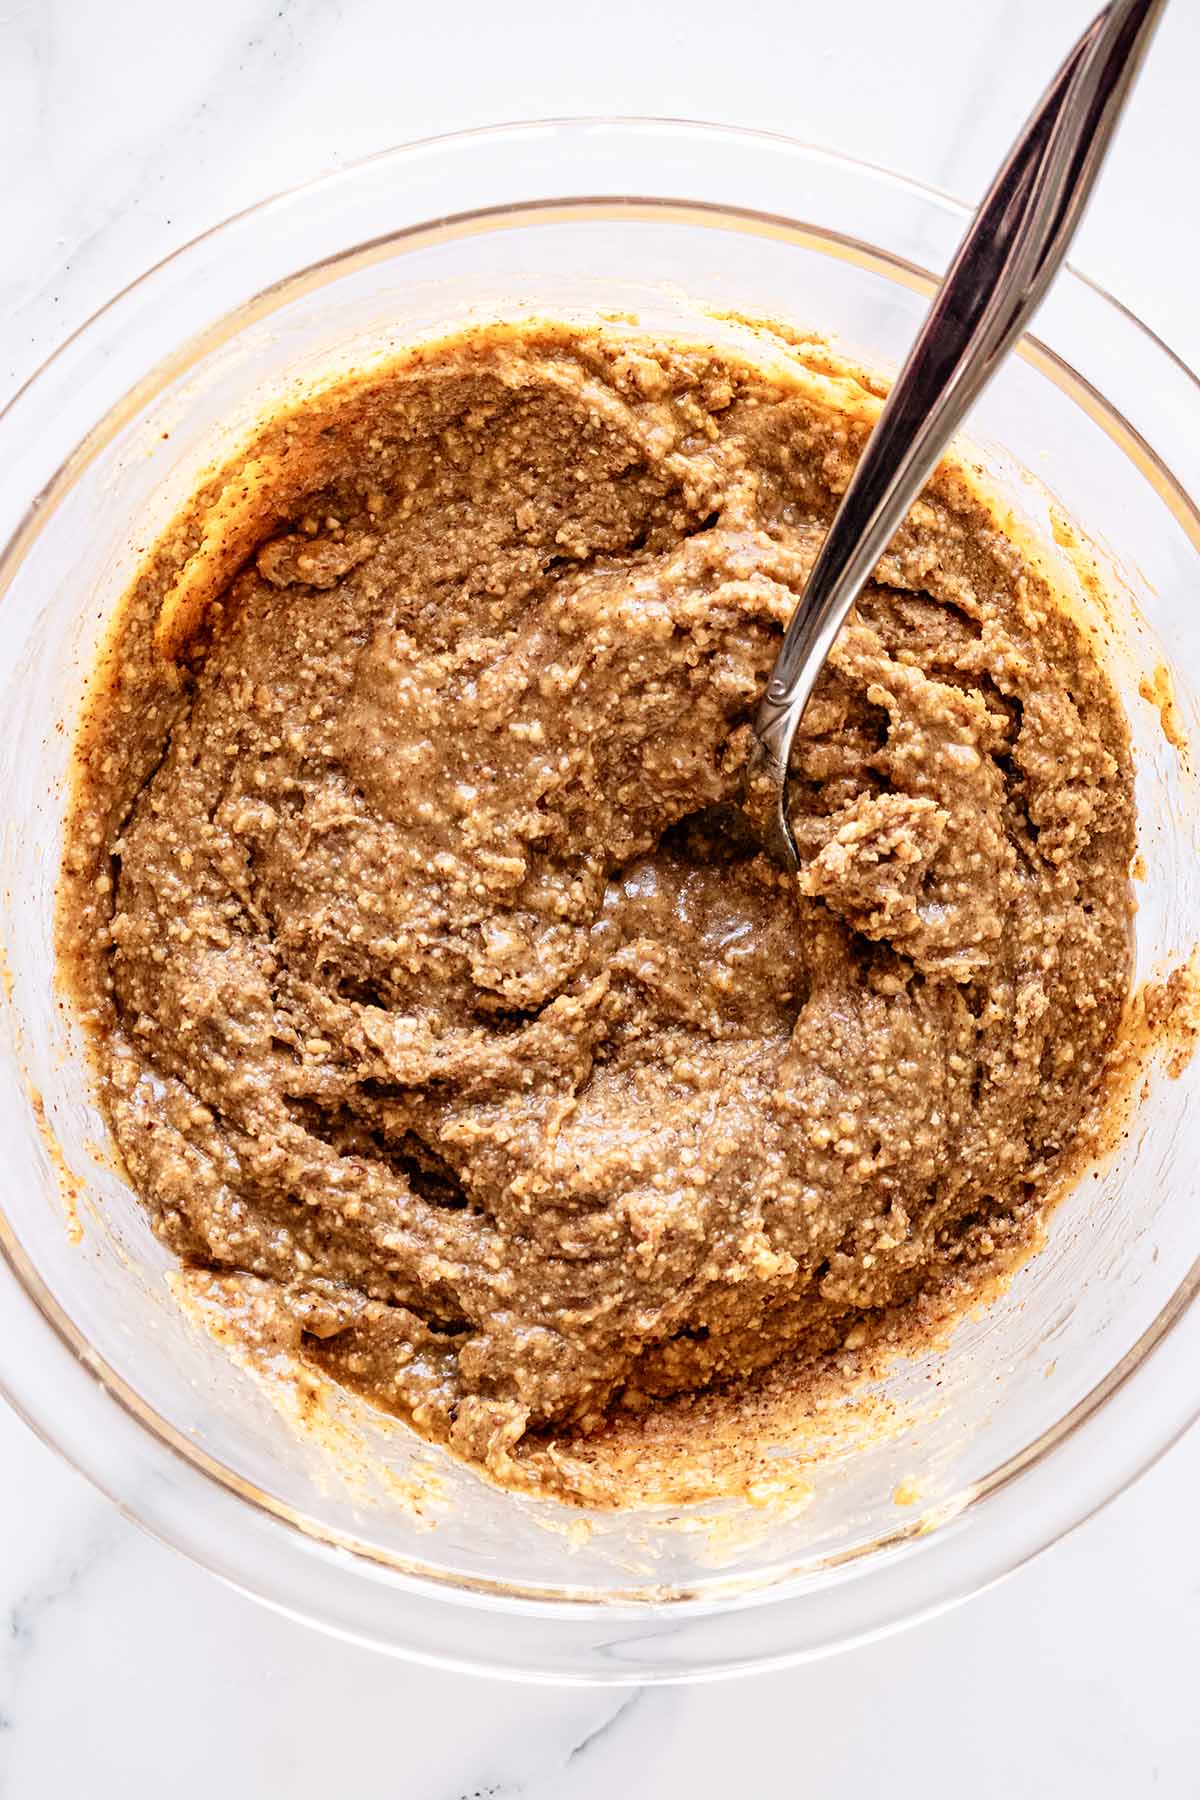 Overhead view of almond butter mixture in a glass bowl with a spoon